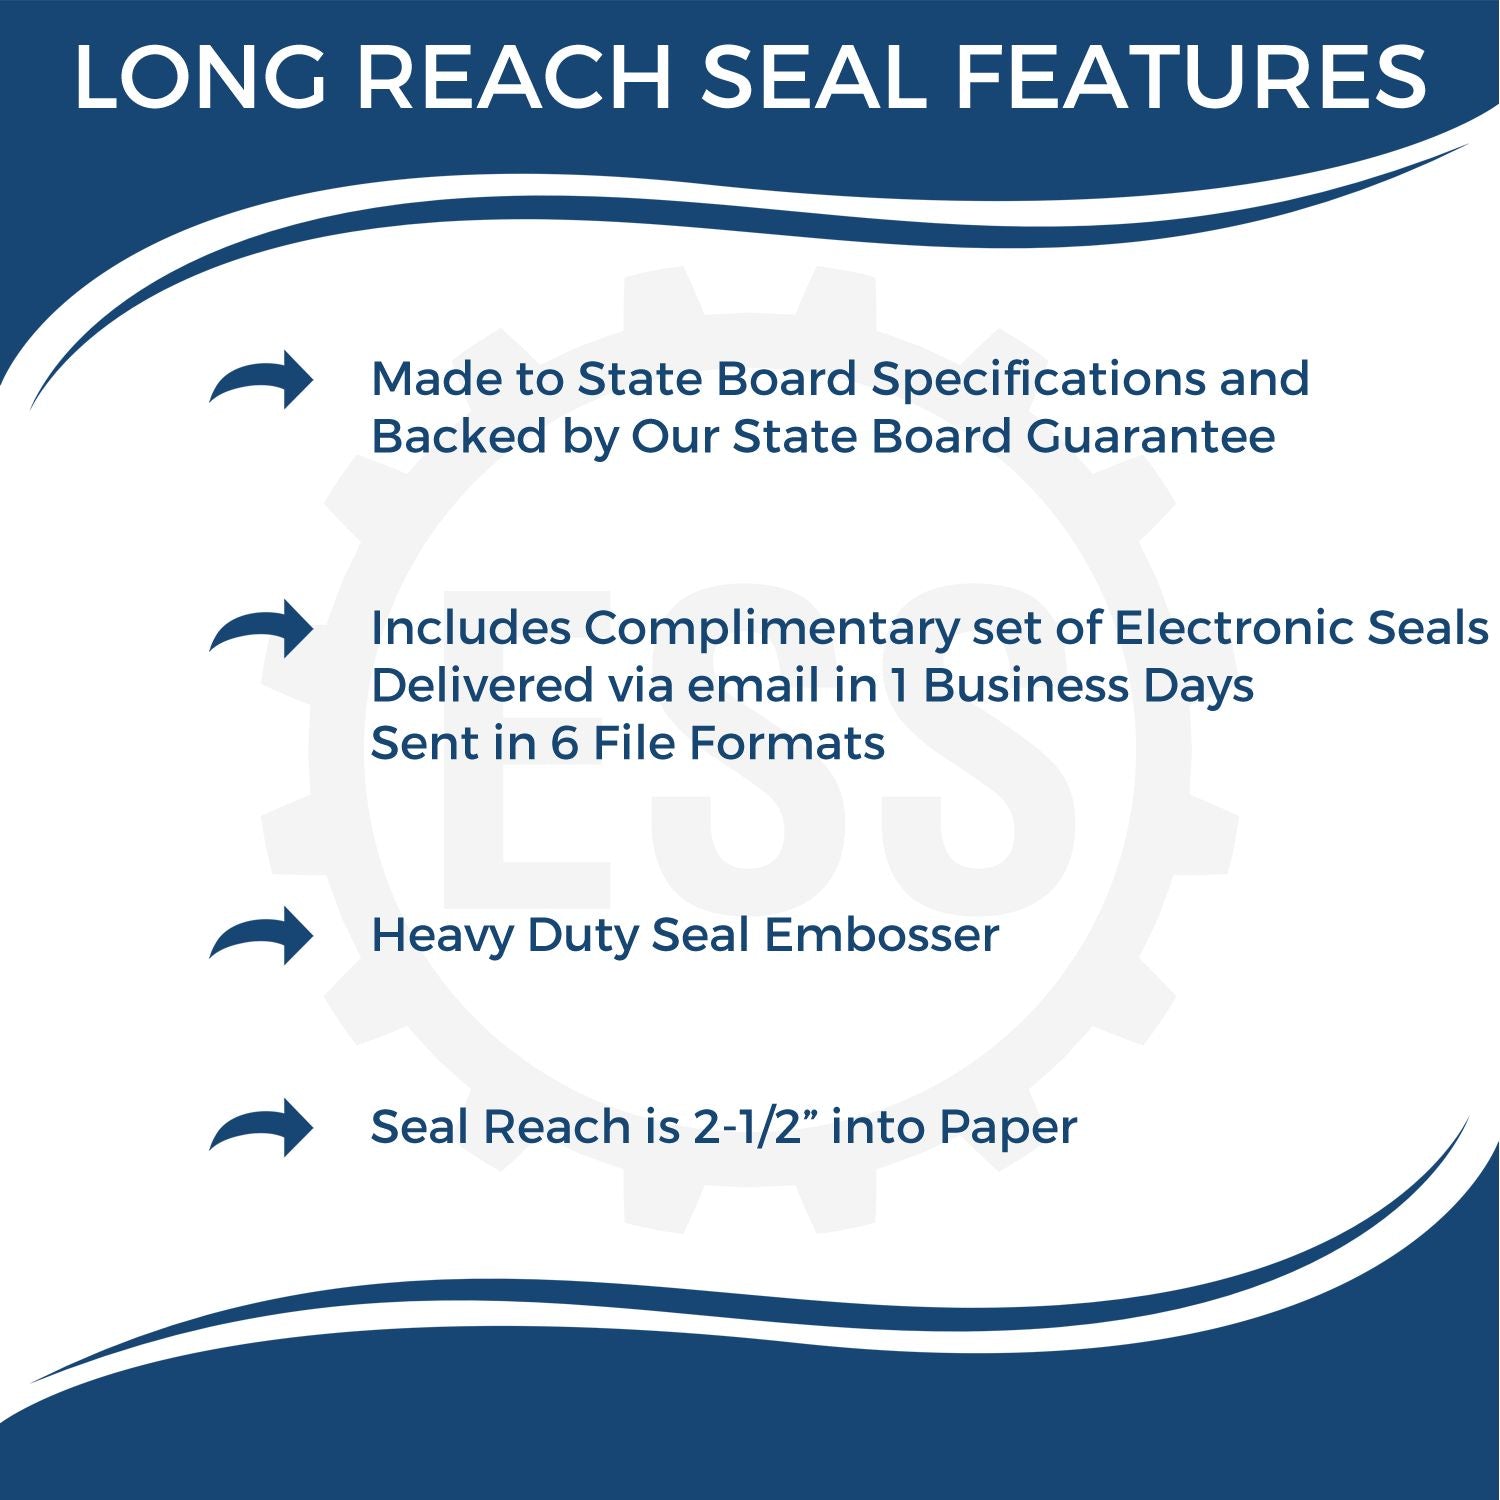 The main image for the Long Reach Montana PE Seal depicting a sample of the imprint and electronic files